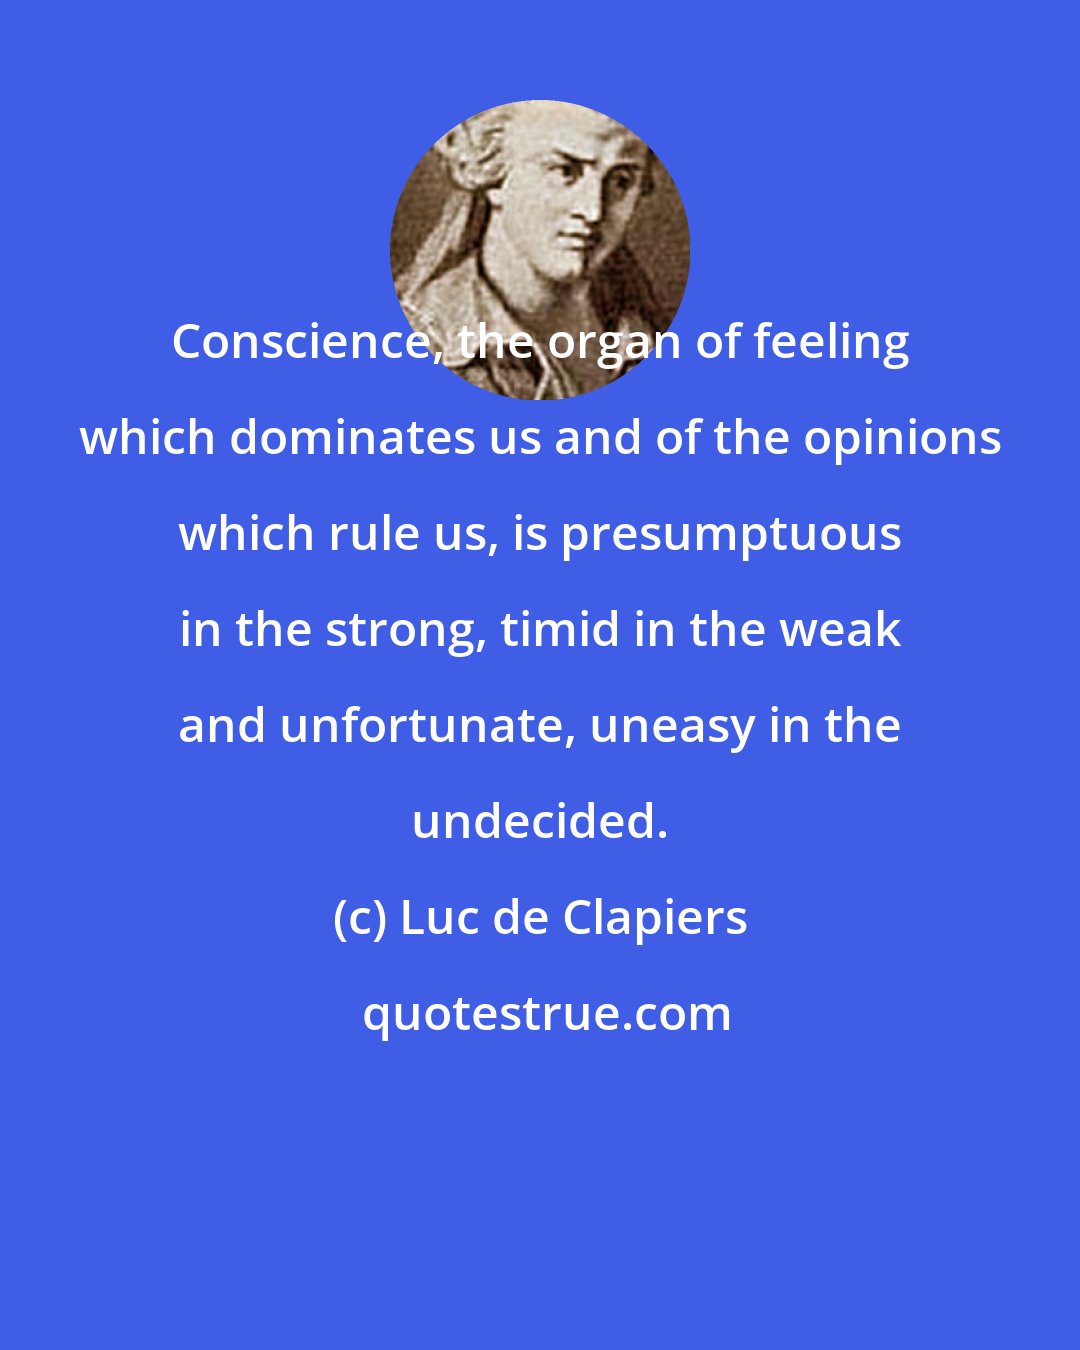 Luc de Clapiers: Conscience, the organ of feeling which dominates us and of the opinions which rule us, is presumptuous in the strong, timid in the weak and unfortunate, uneasy in the undecided.